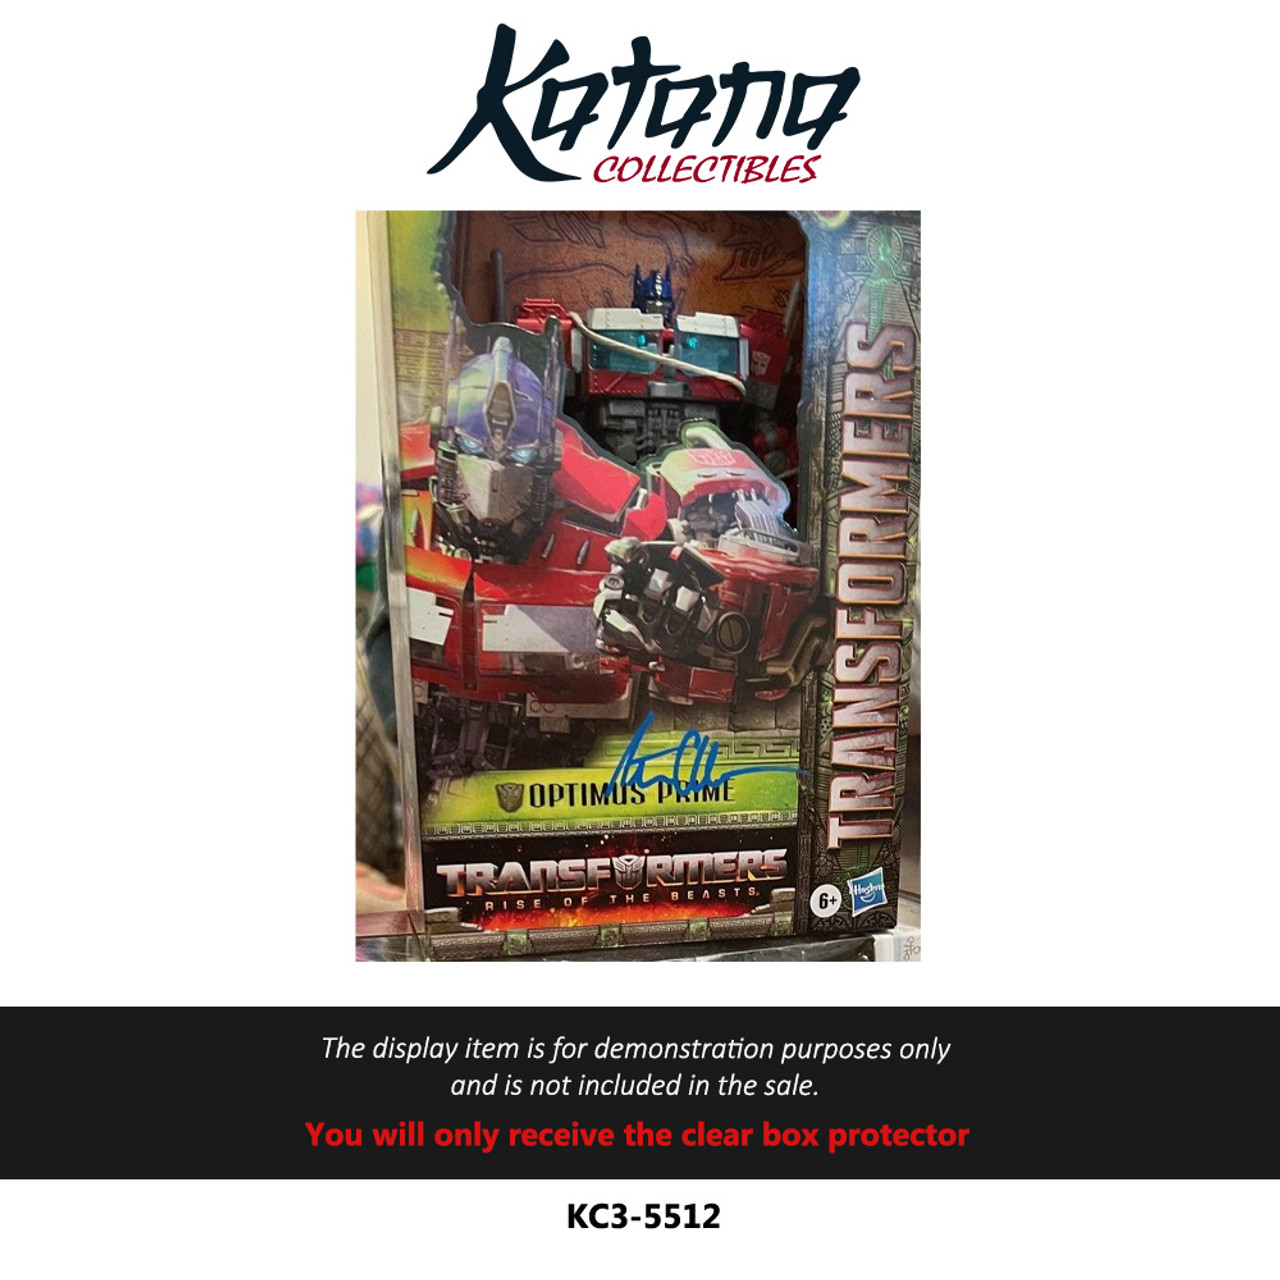 Katana Collectibles Protector For Transformer Rise Of The Beast Optimus Prime